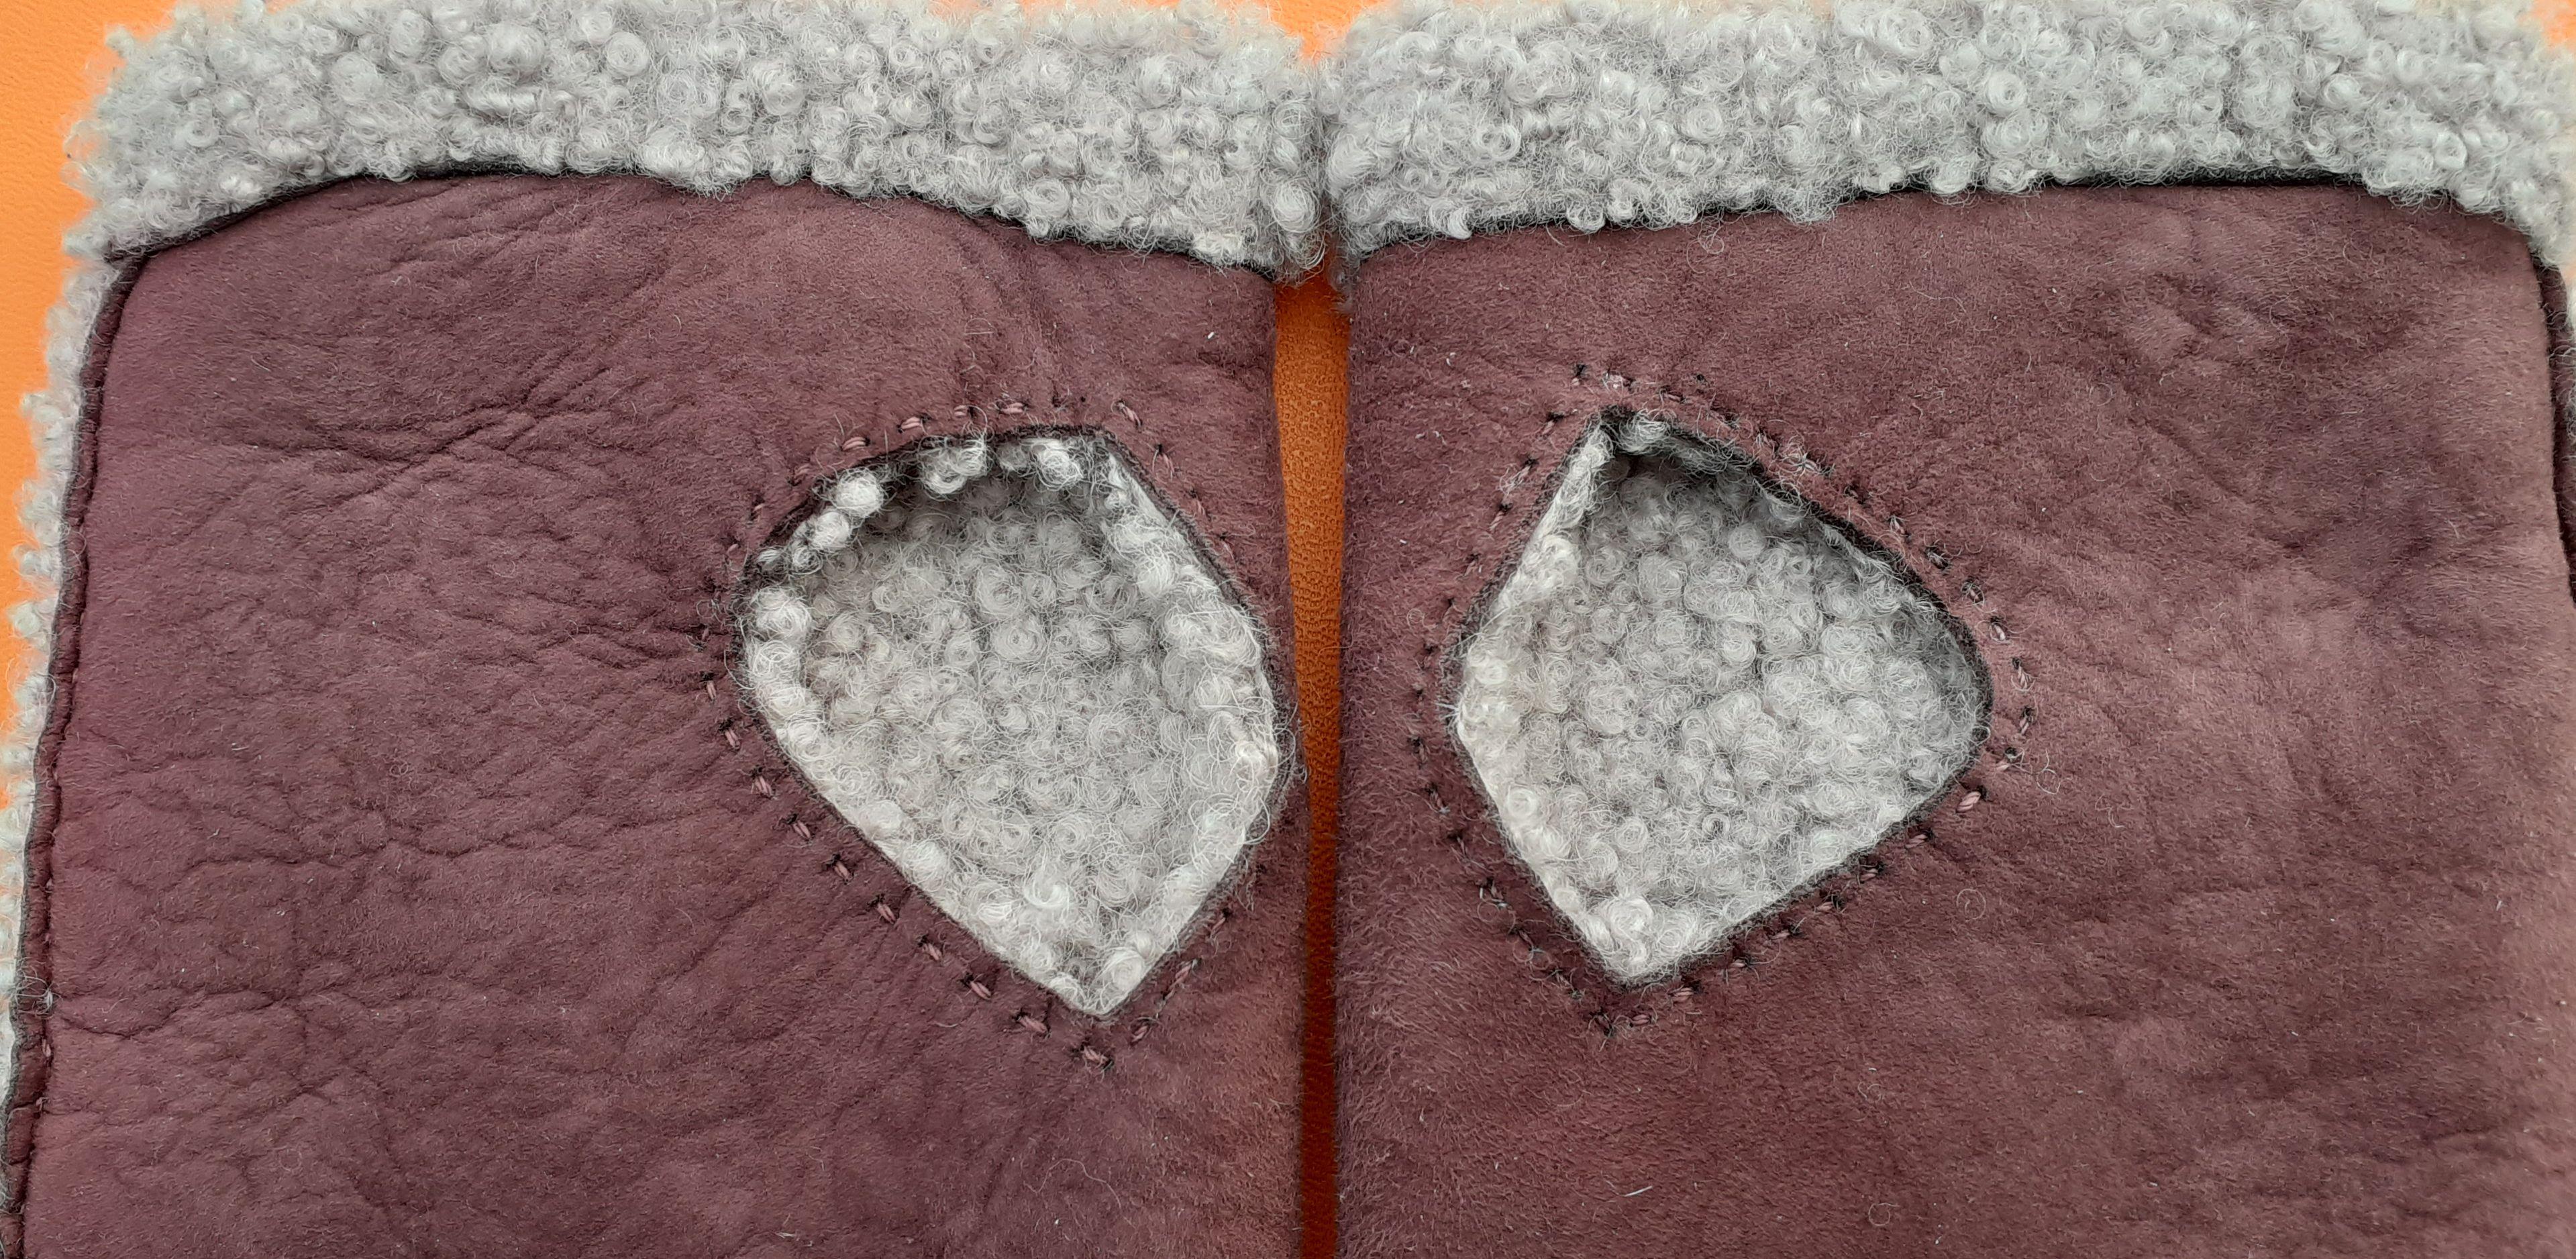 Hermès Open Gloves Mittens Teddy Plush Shearling Leather Wool Purple Size 6.5 For Sale 2